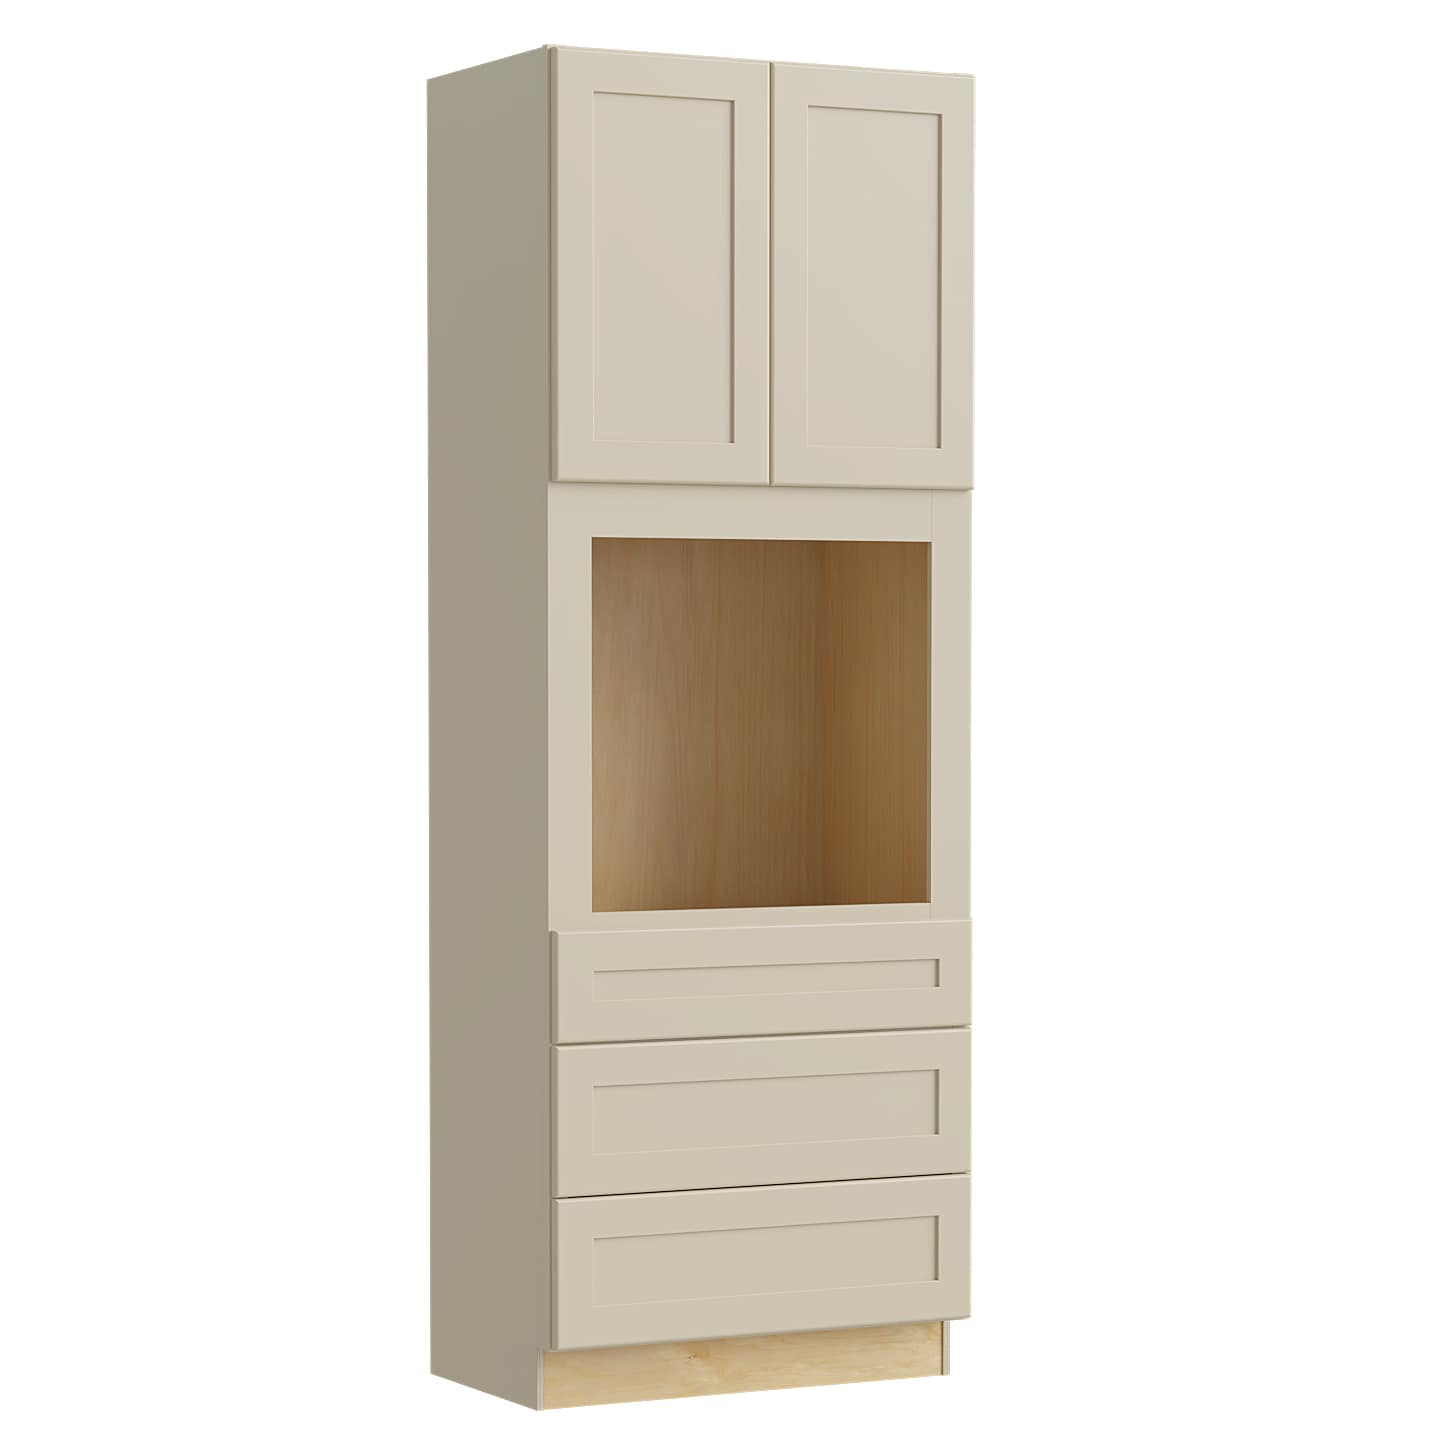 Luxxe Cabinetry 33-in W x 96-in H x 24-in D Norfolk Blended Cream Painted Drawer Base Fully Assembled Semi-custom Cabinet in Off-White | OC332496U-NBC